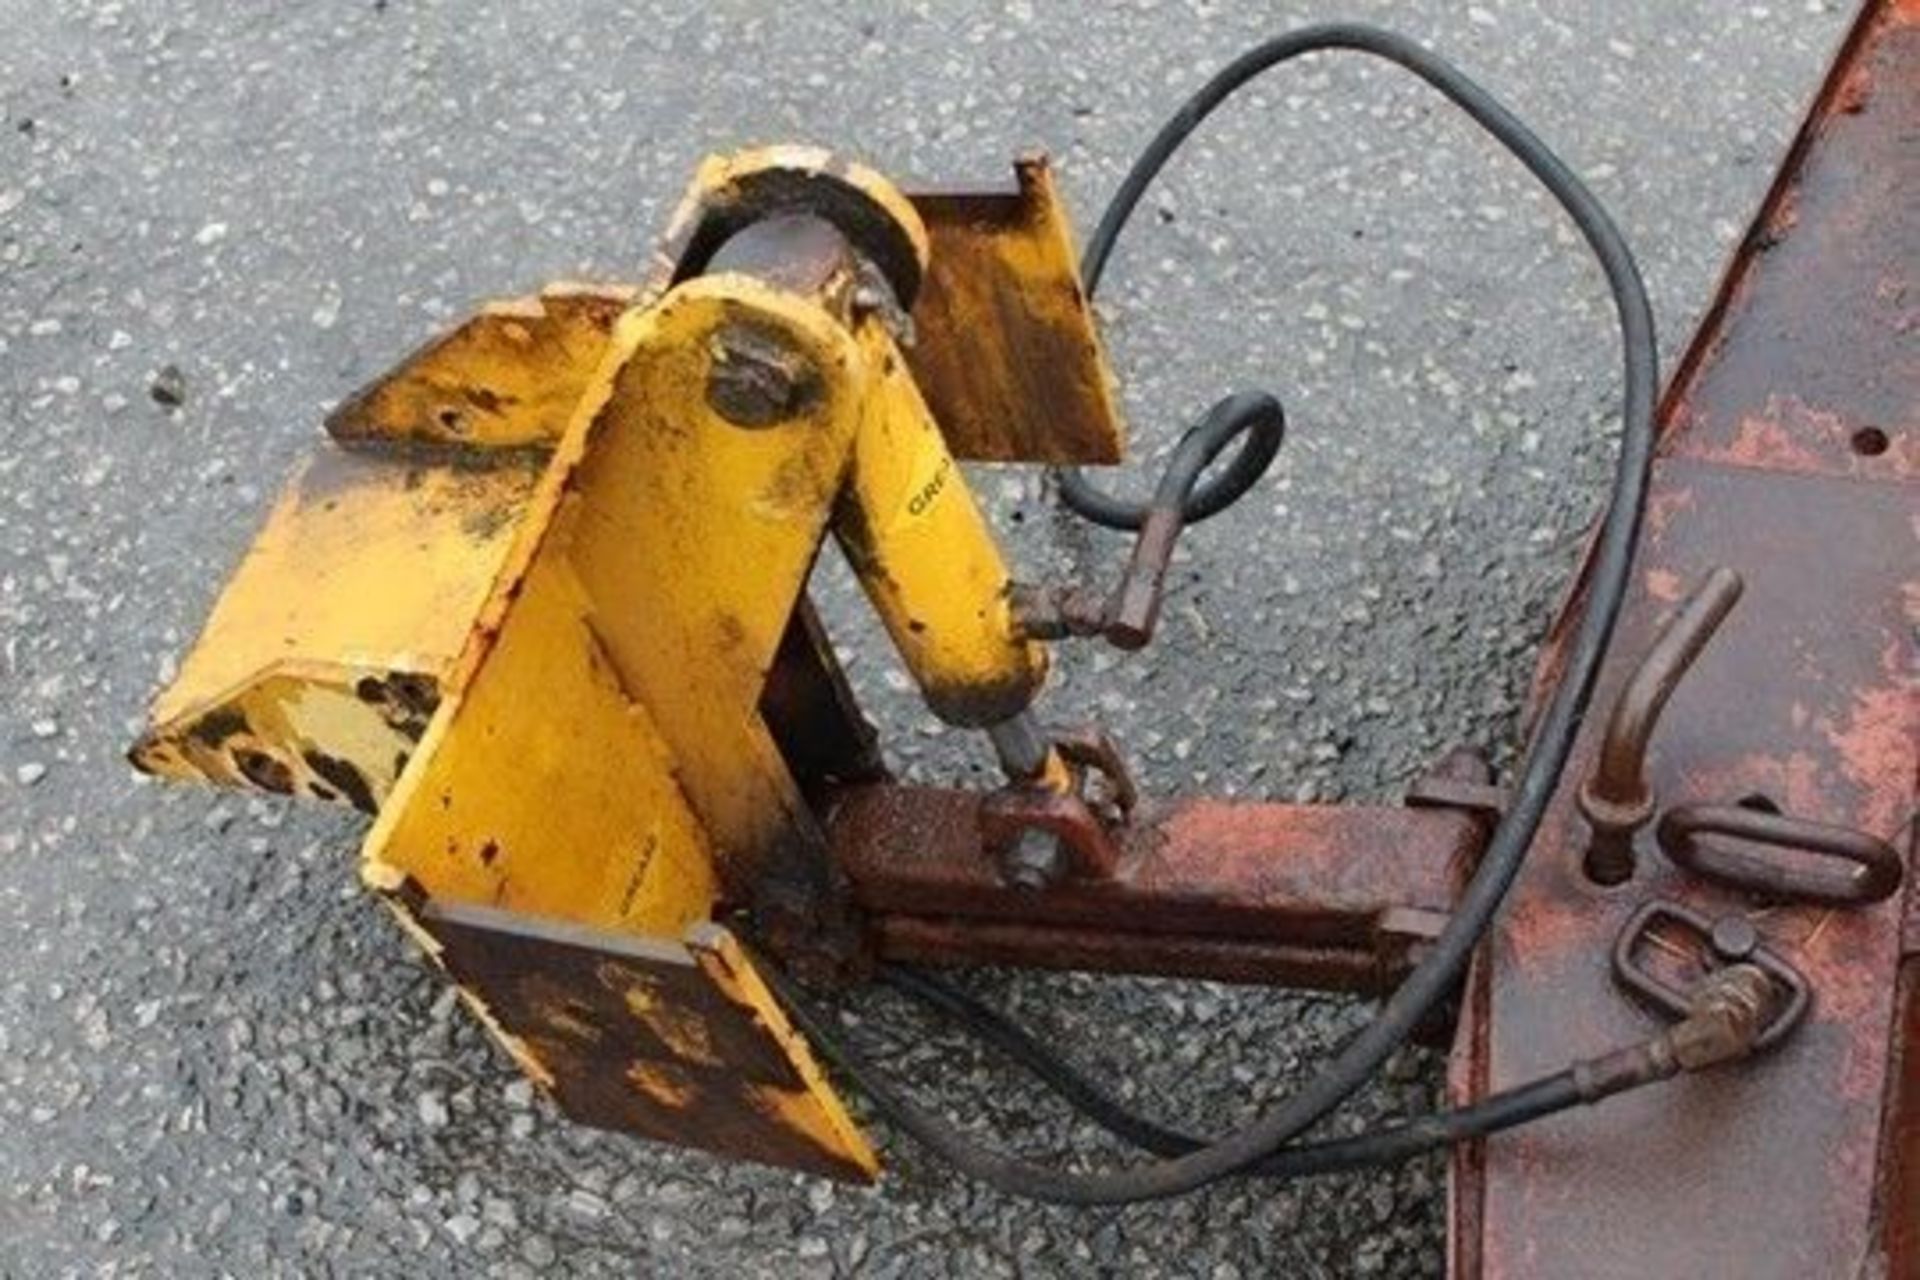 Snow Plow Attachment For Compact Tractor - Image 2 of 5